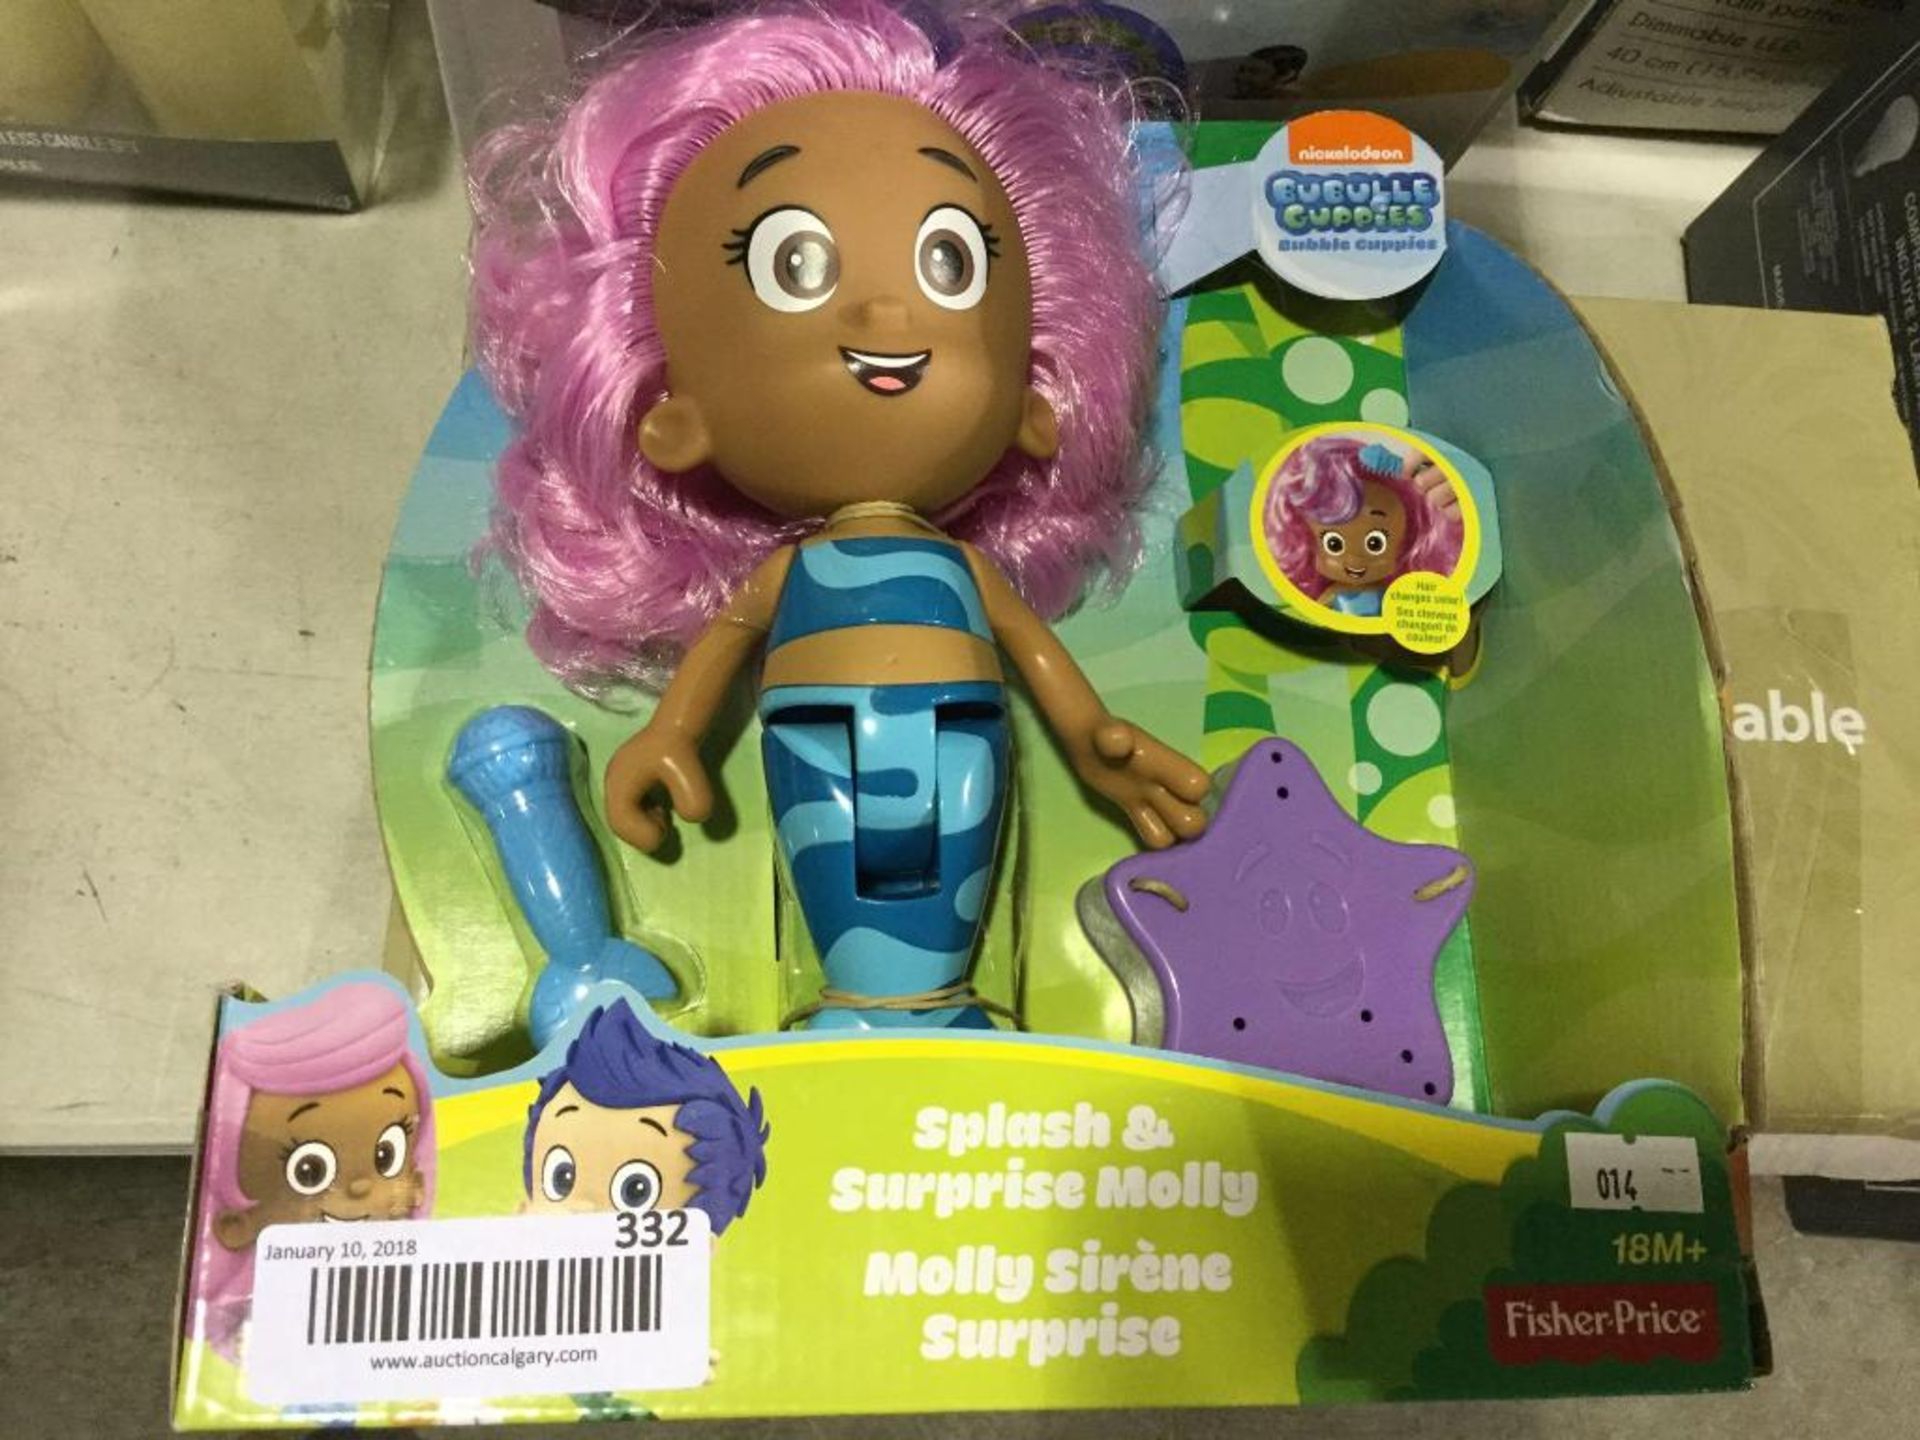 Bobble Guppies Splash and Surprise Molly toy